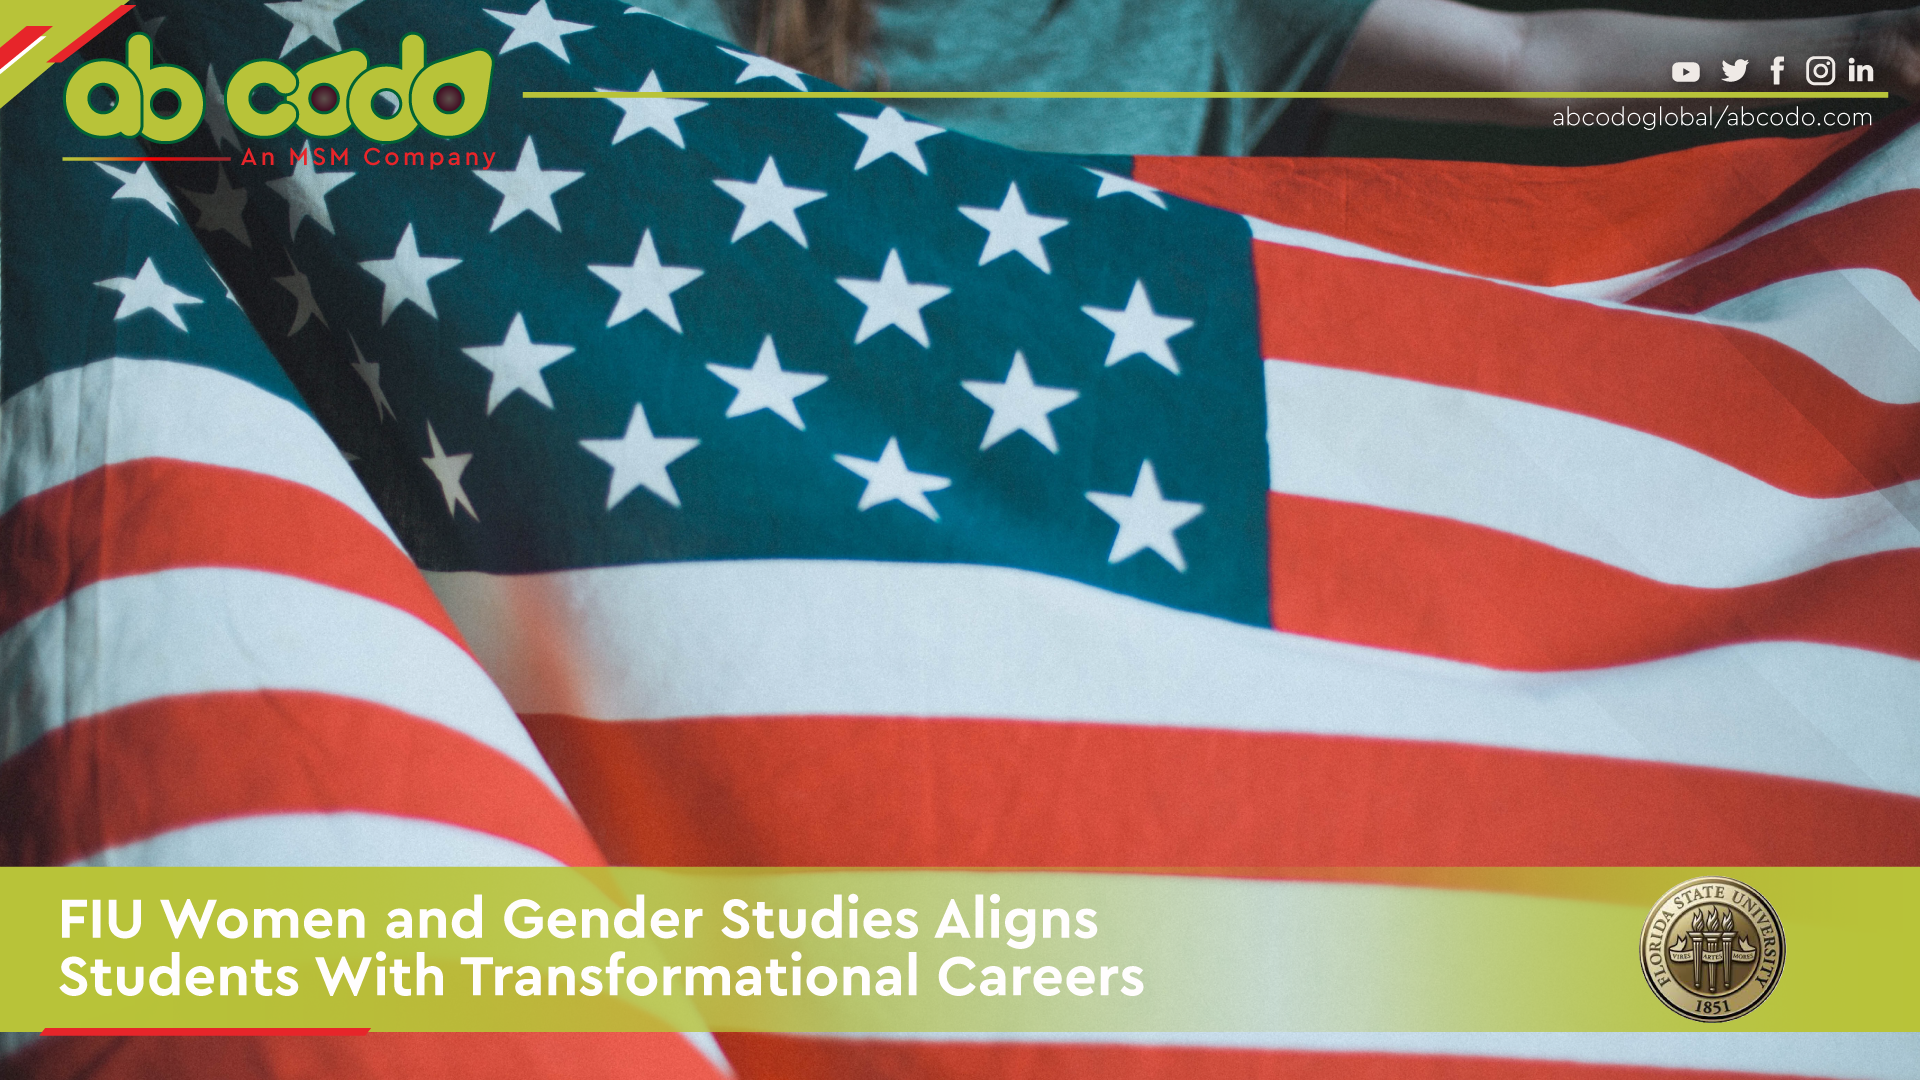 FIU Women and Gender Studies Aligns Students With Transformational Careers